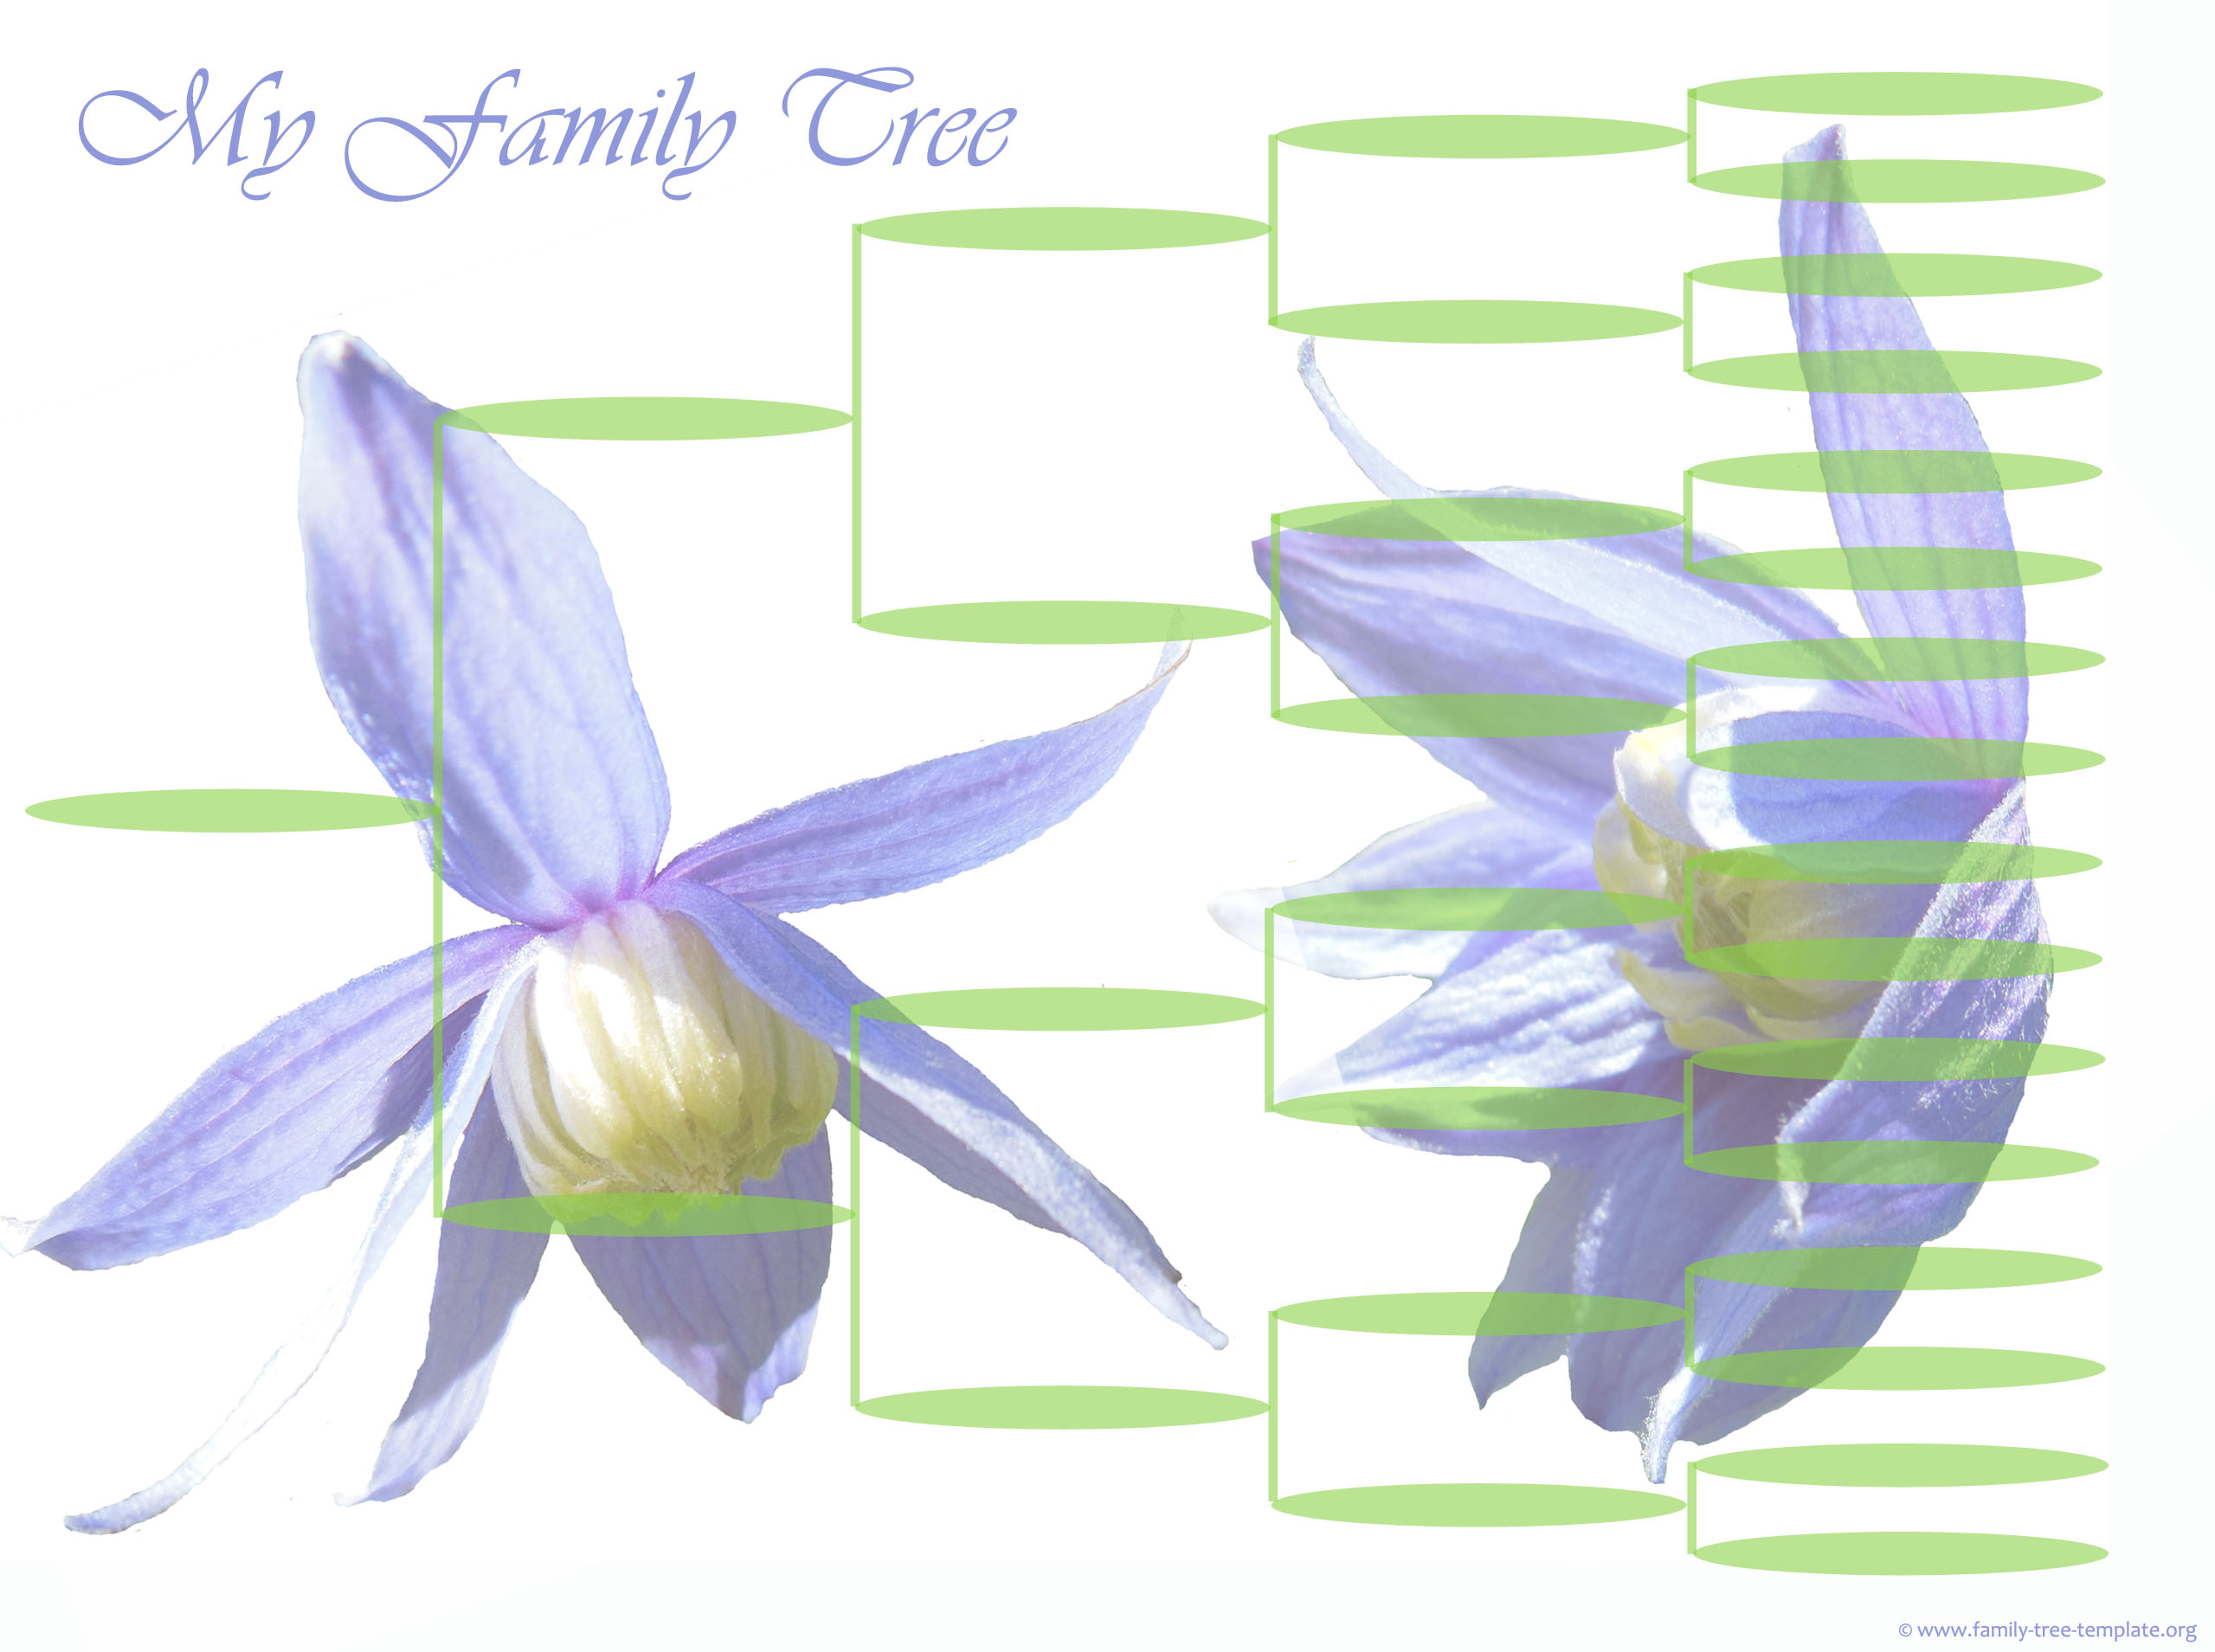 High resolution family tree diagram to print. 5 generations.